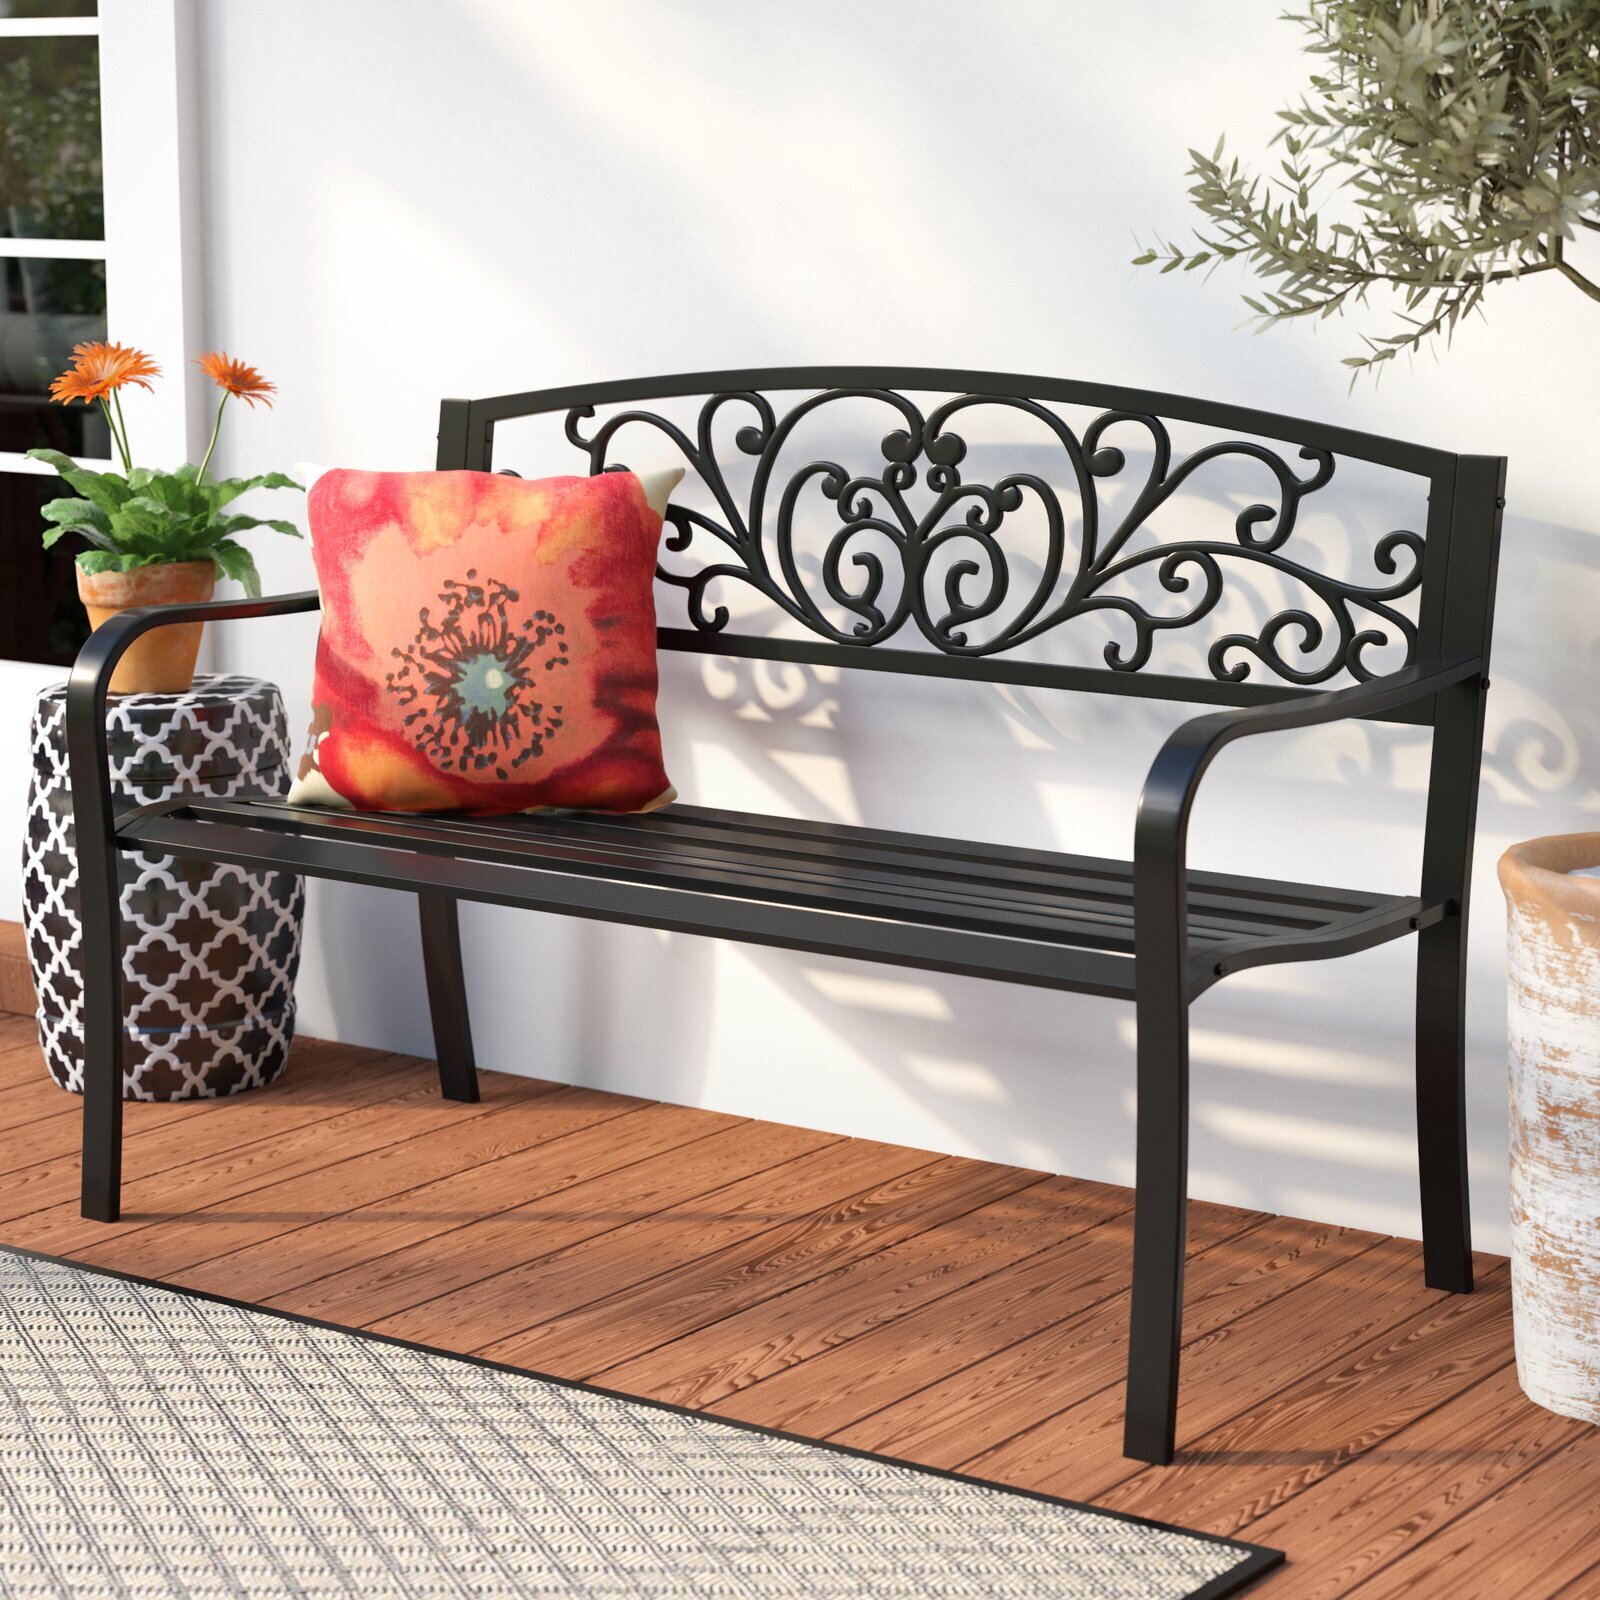 Wrought Iron Garden Bench With Scrolled Backrest